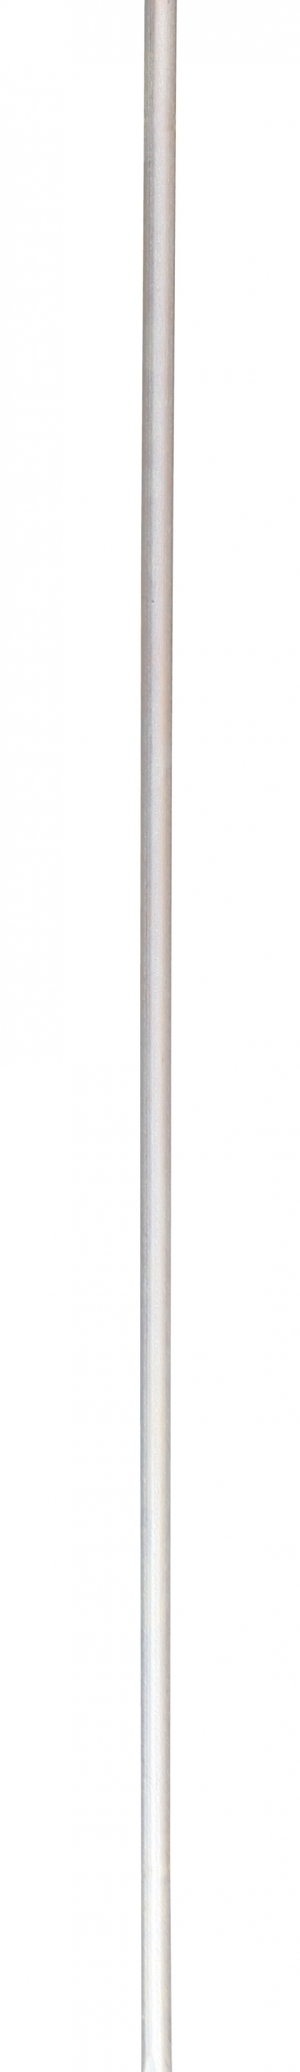 Earth stake, 1 mtr 12 mm, excl. clamp